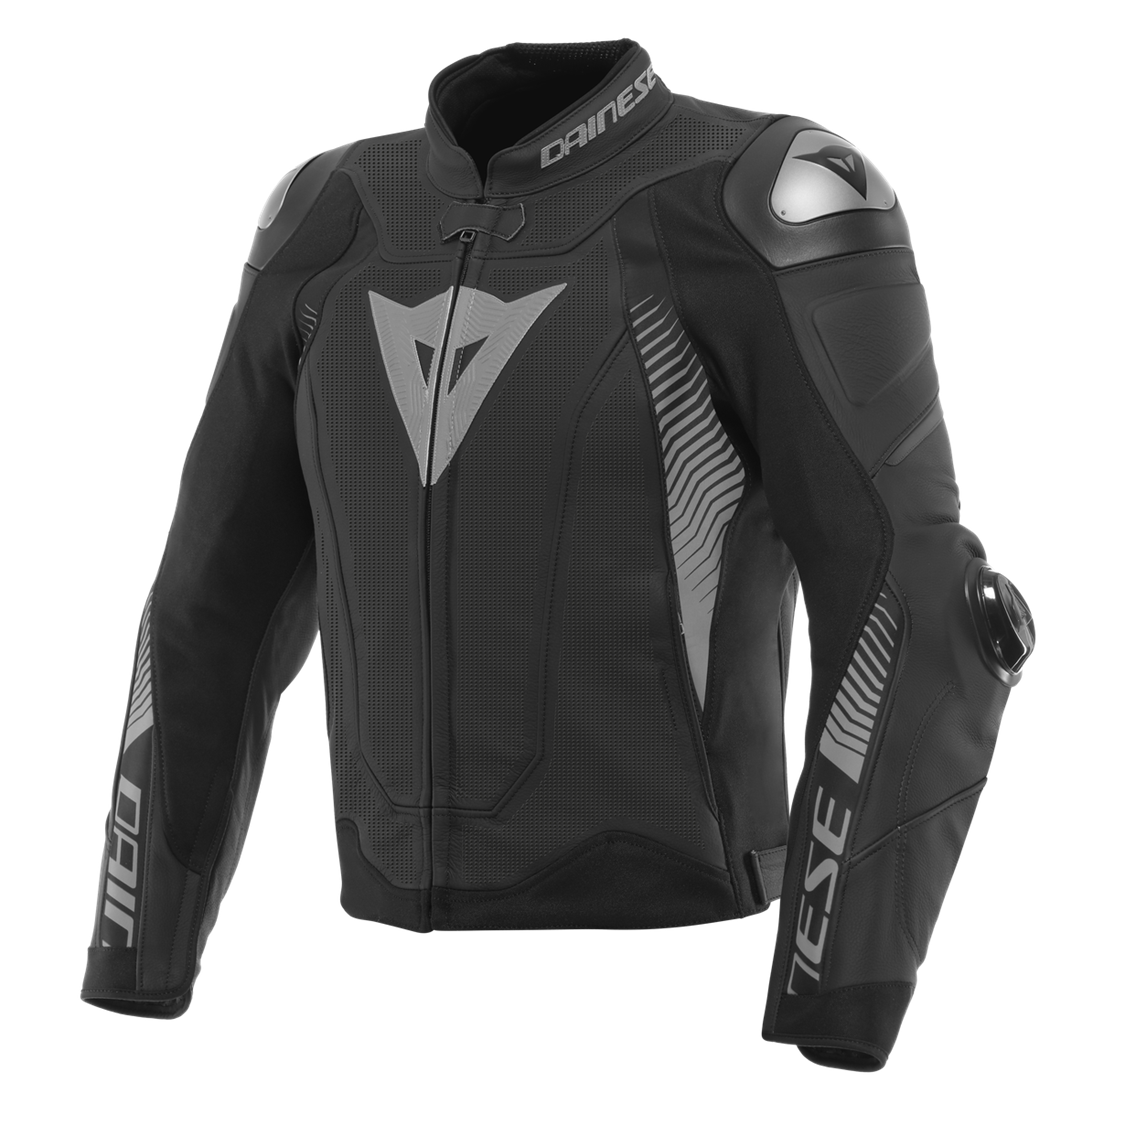 DAINESE, Dainese Super Speed 4 Leather Jacket Perforated - Black-Matt/Charcoal-Gray